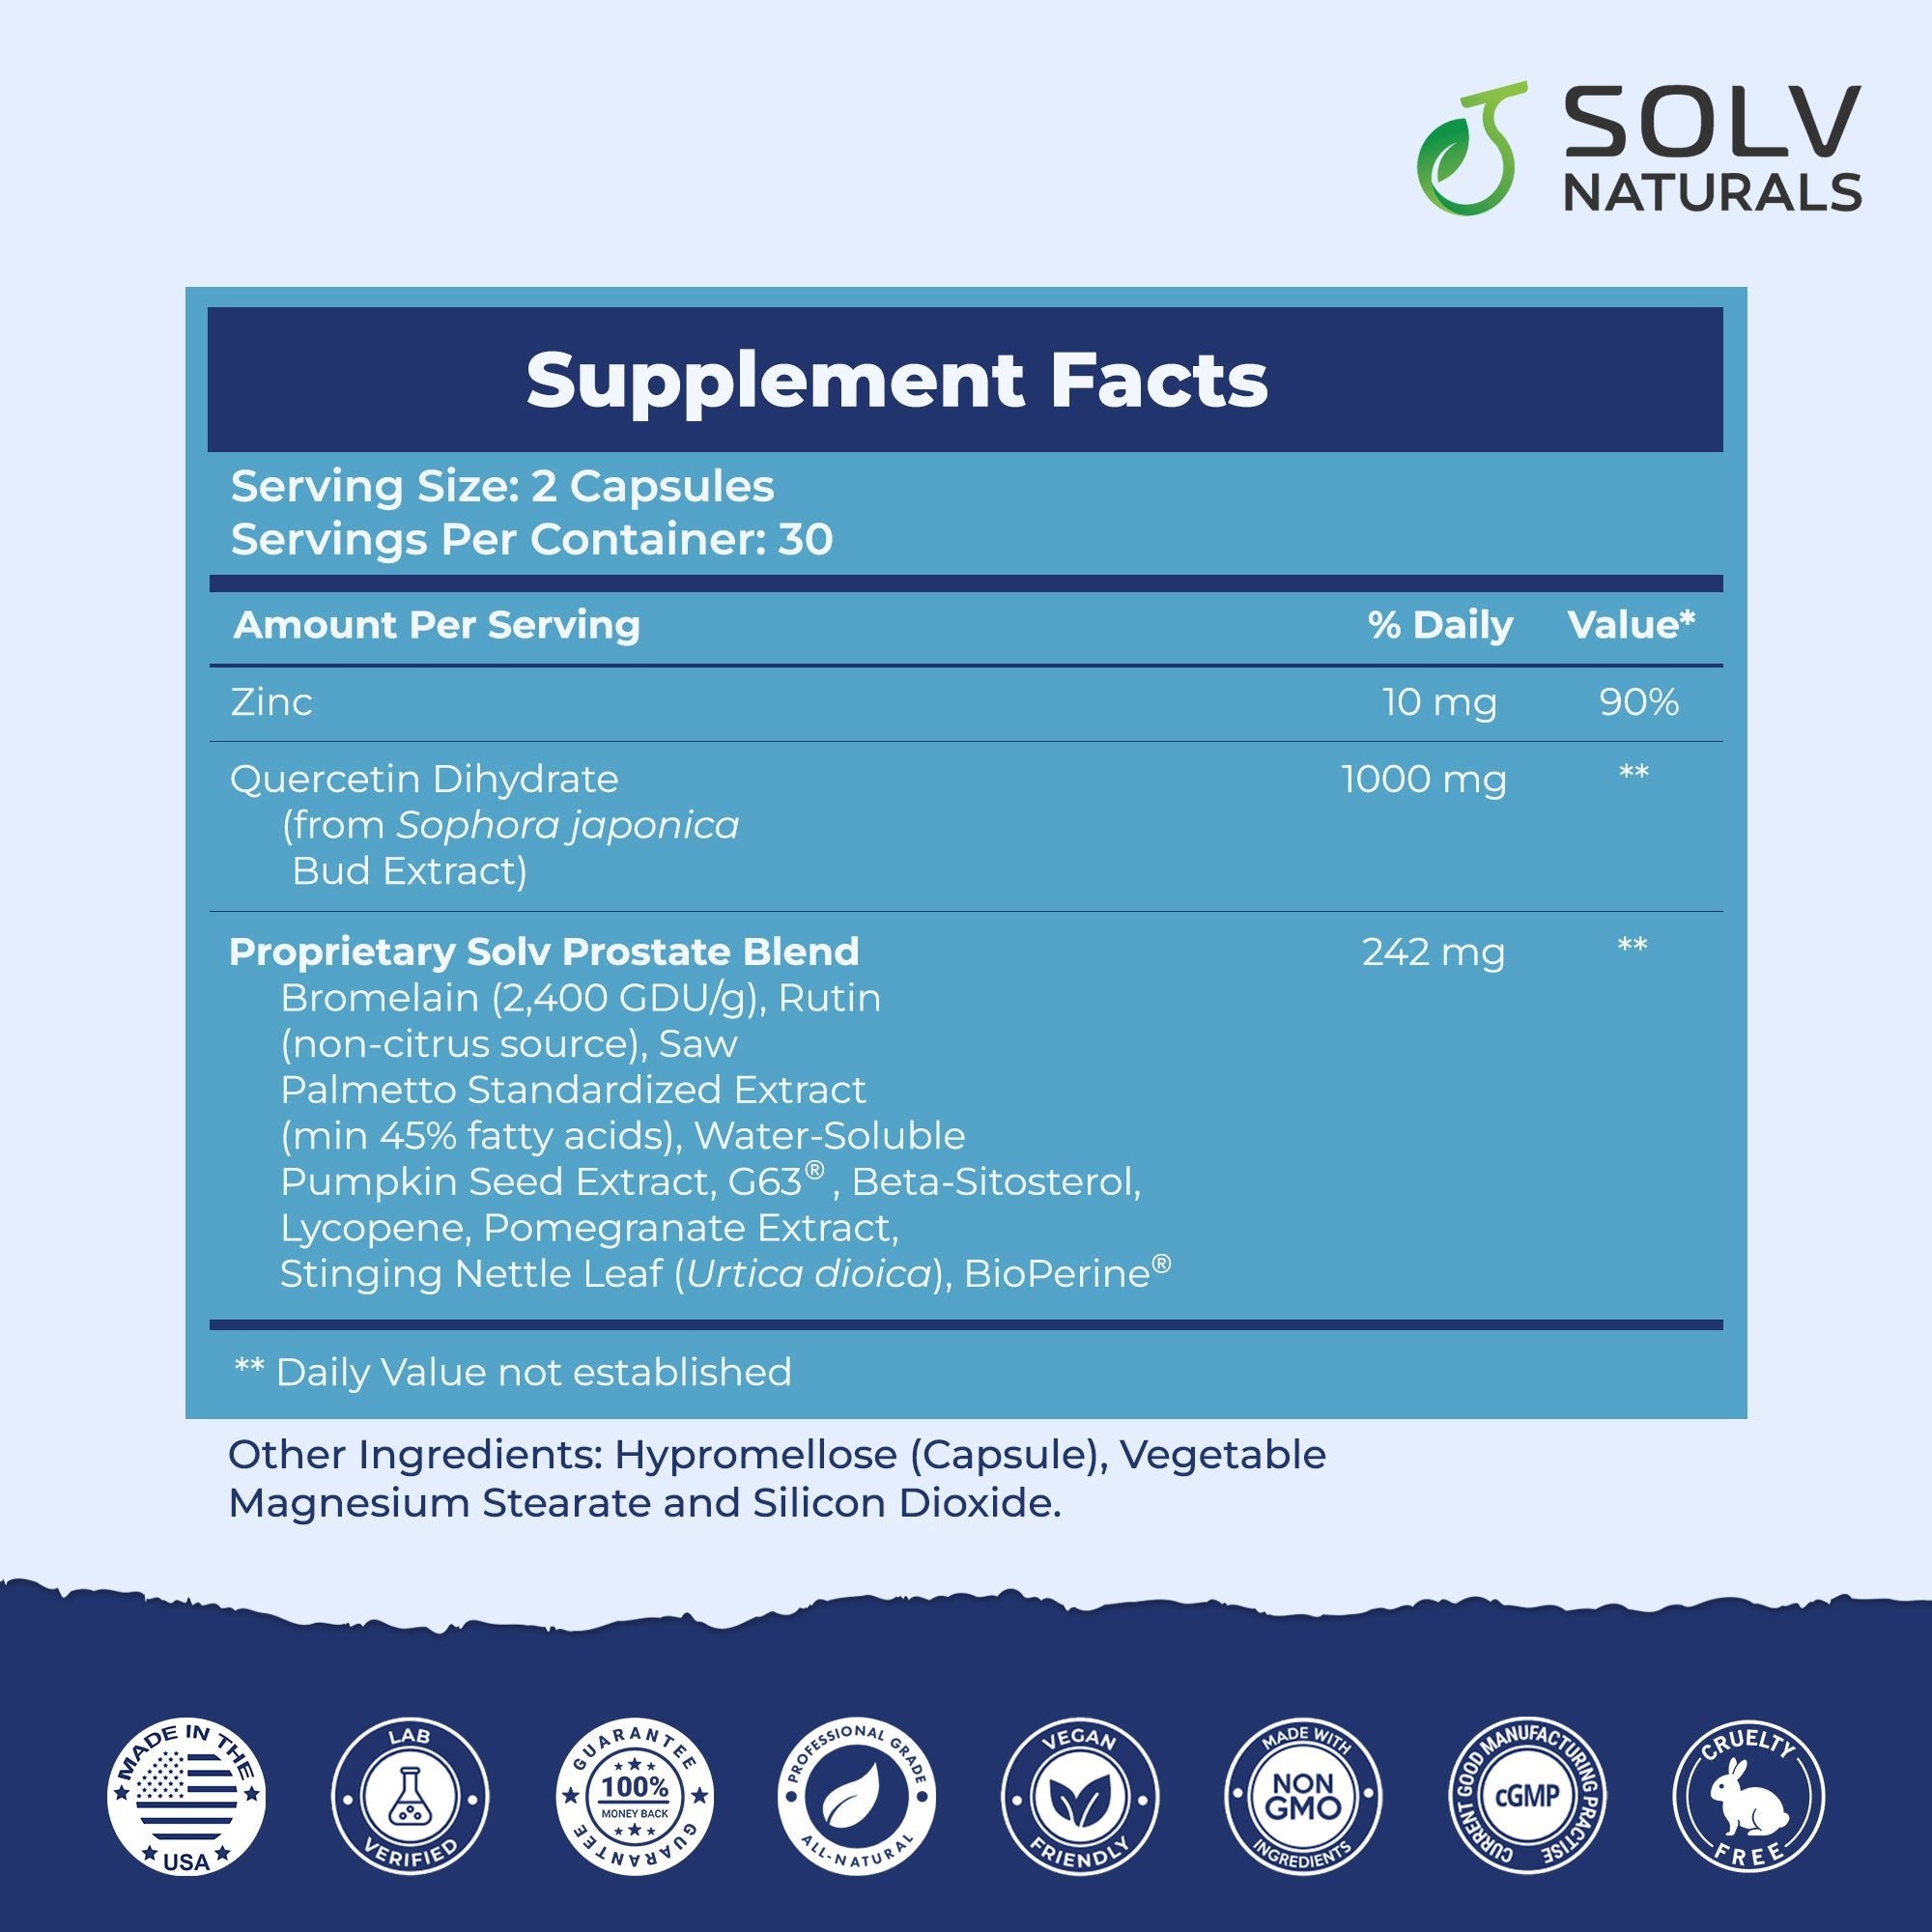 PROSTASOLV Supplement Facts.  Contains Zinc, Quercetin, Bromelain, Rutin, Saw Palmetto, Water-Soluble Pumpkin Seed Extract, G63, Beta-Sitosterol, Lycopene, Pomegranate Extract, Stinging Nettle Leaf and BioPerine in a Vegan capsule